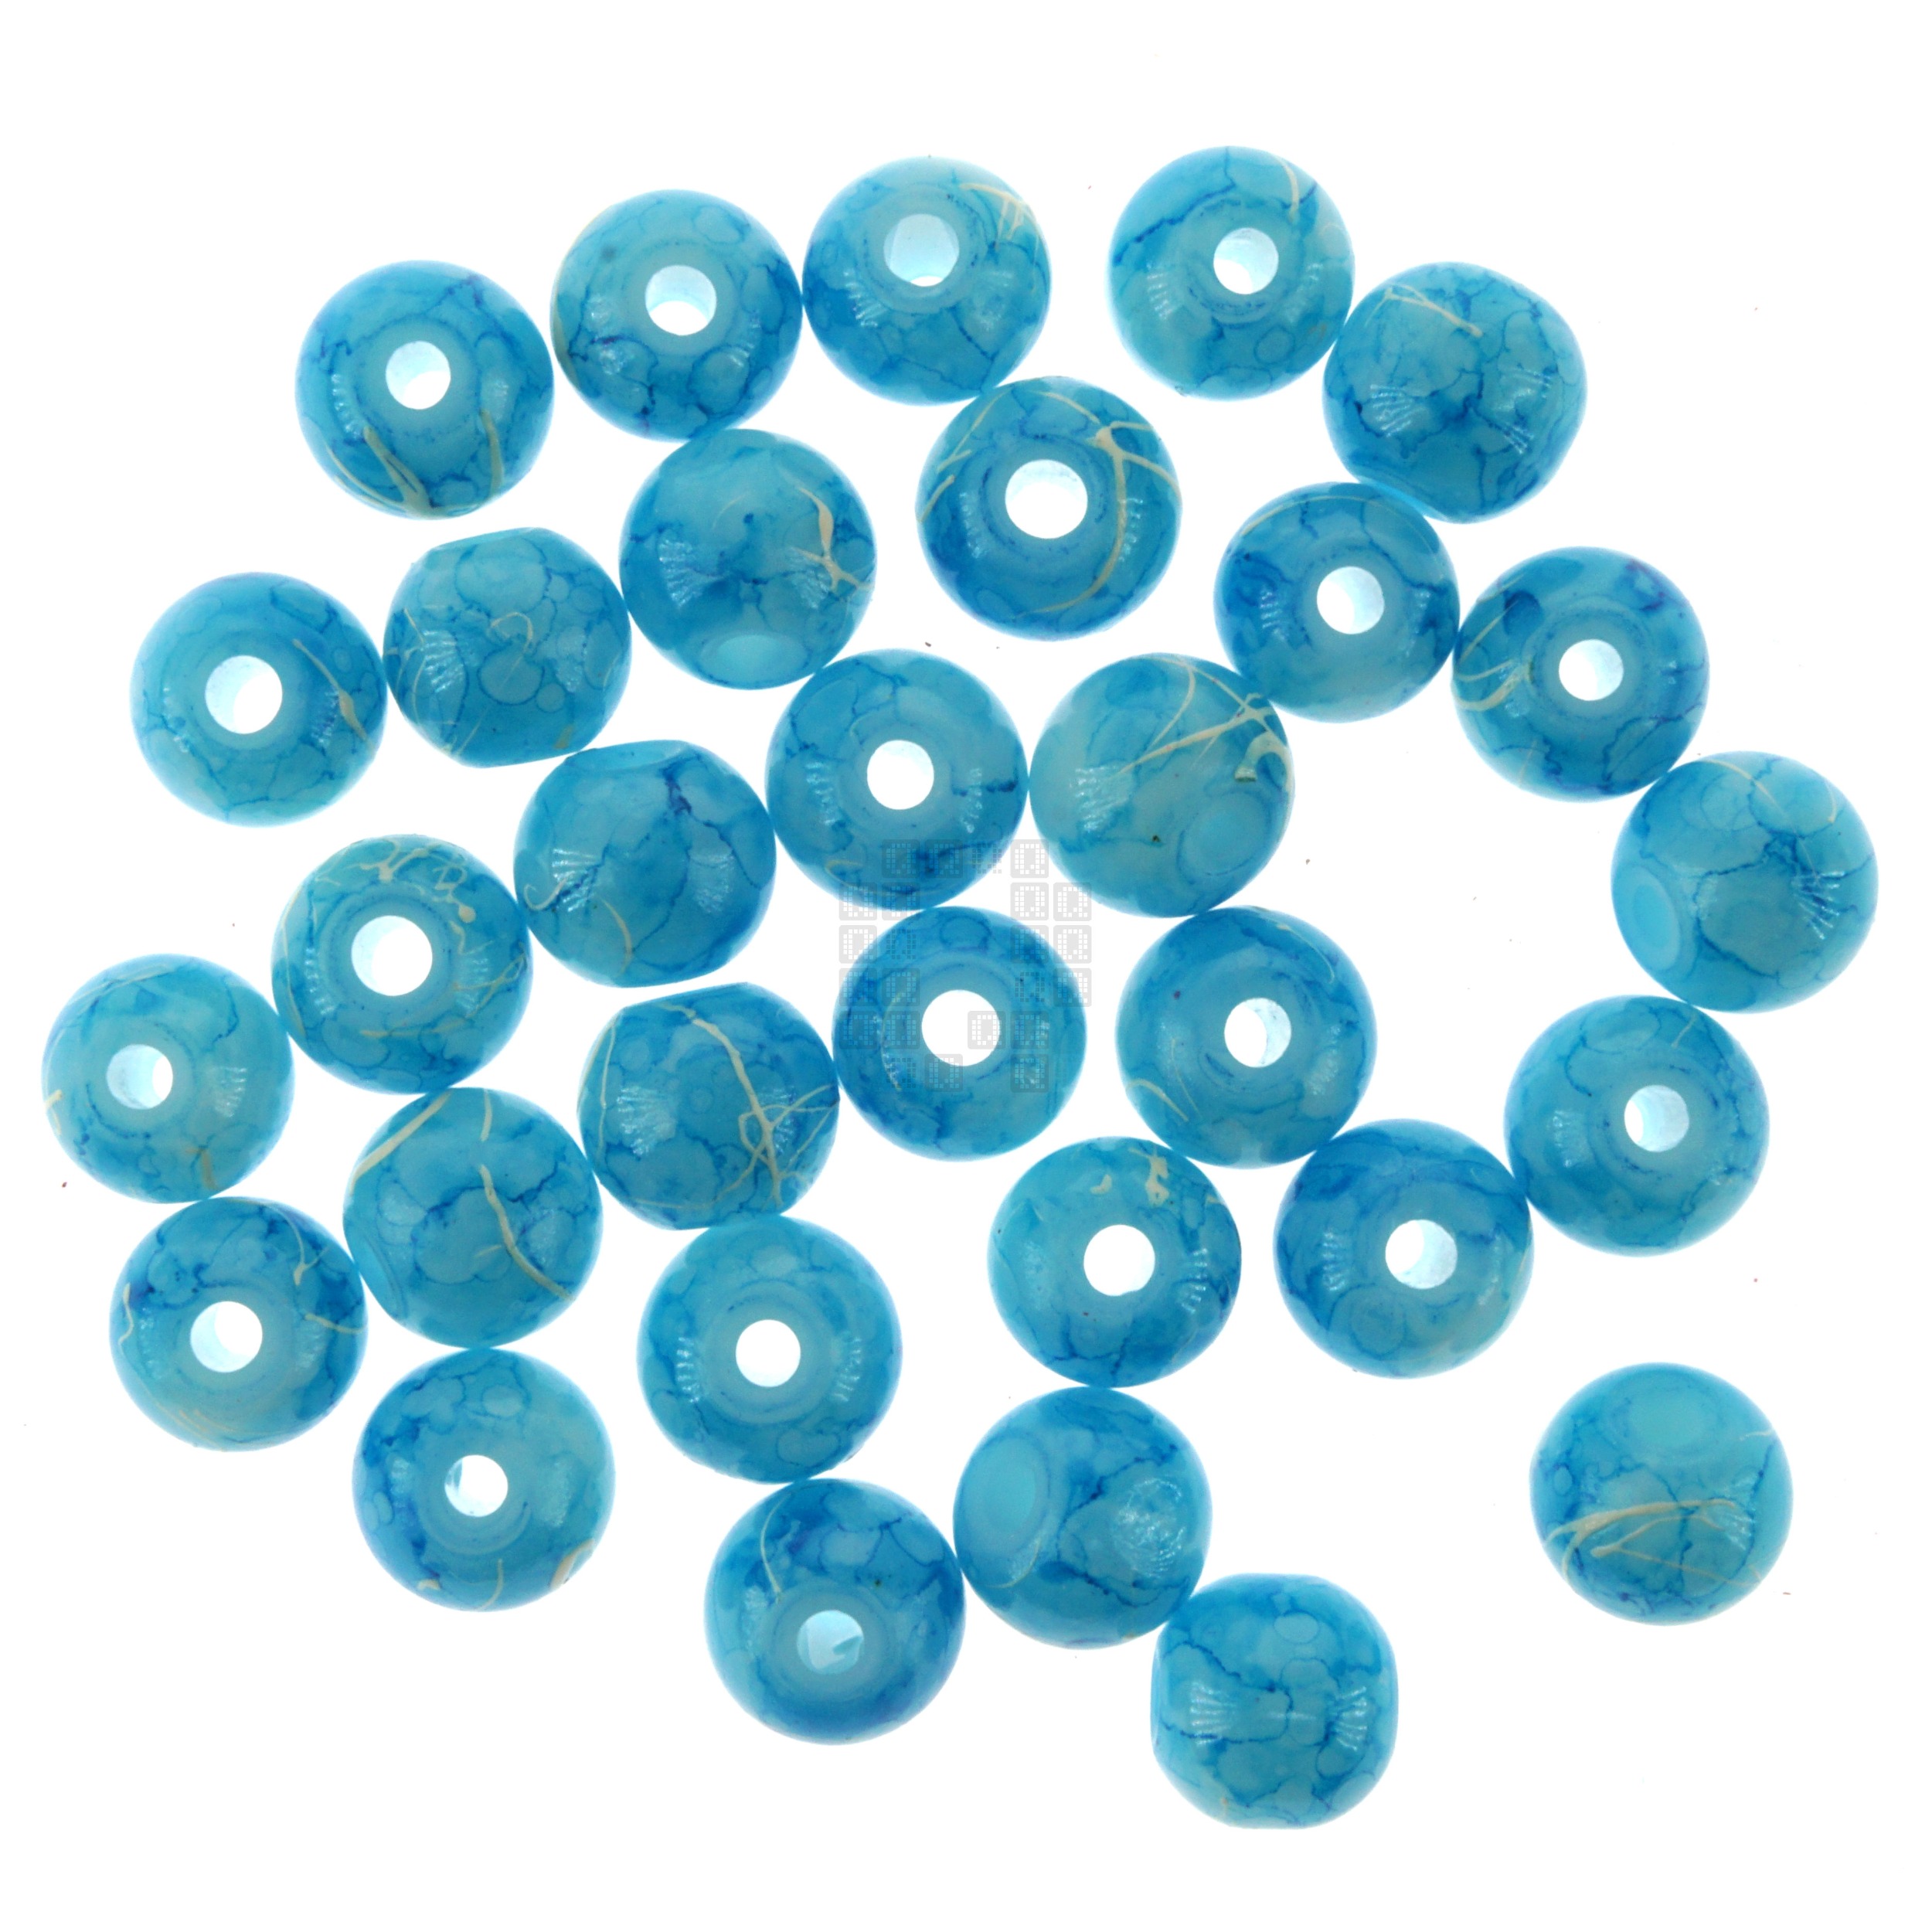 Robin Egg Blue 8mm Loose Glass Beads, 30 Pieces